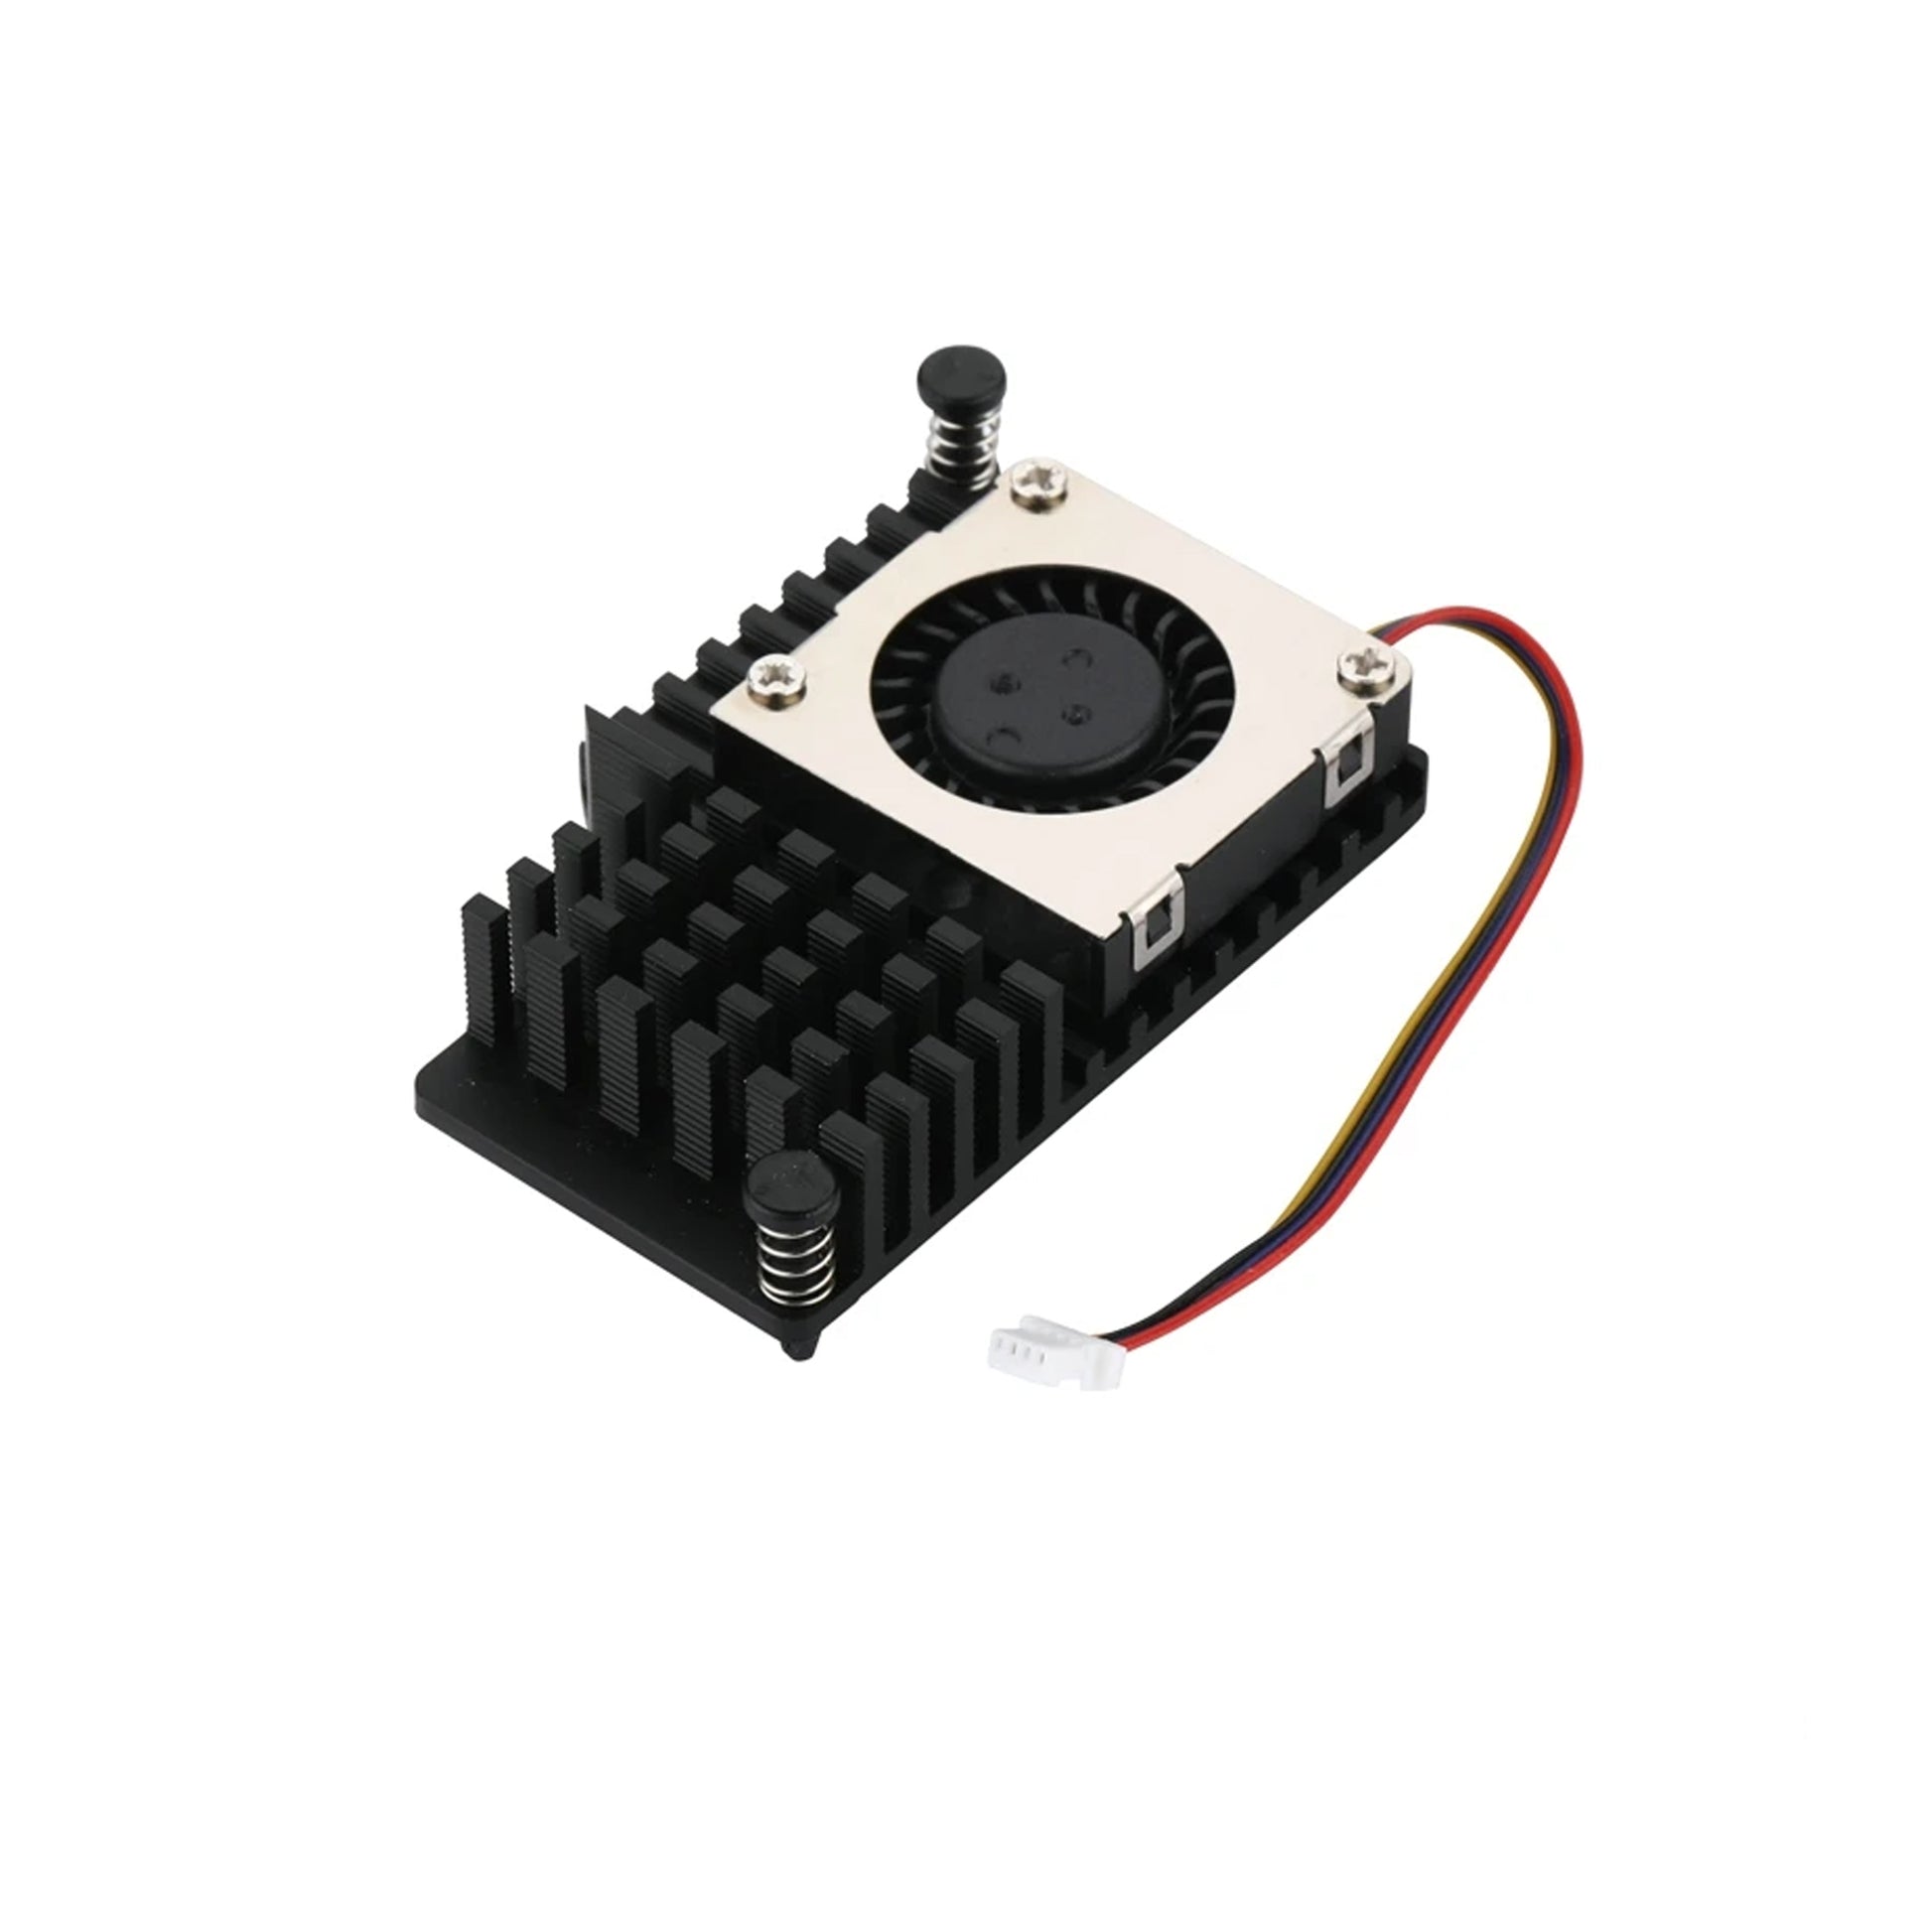 Raspberry Pi 5 Active Cooler Raspberry Pi 5 Cooling Fan Compatible with Raspberry Pi 5 4GB, and 8GB - Black - RS5759 - REES52